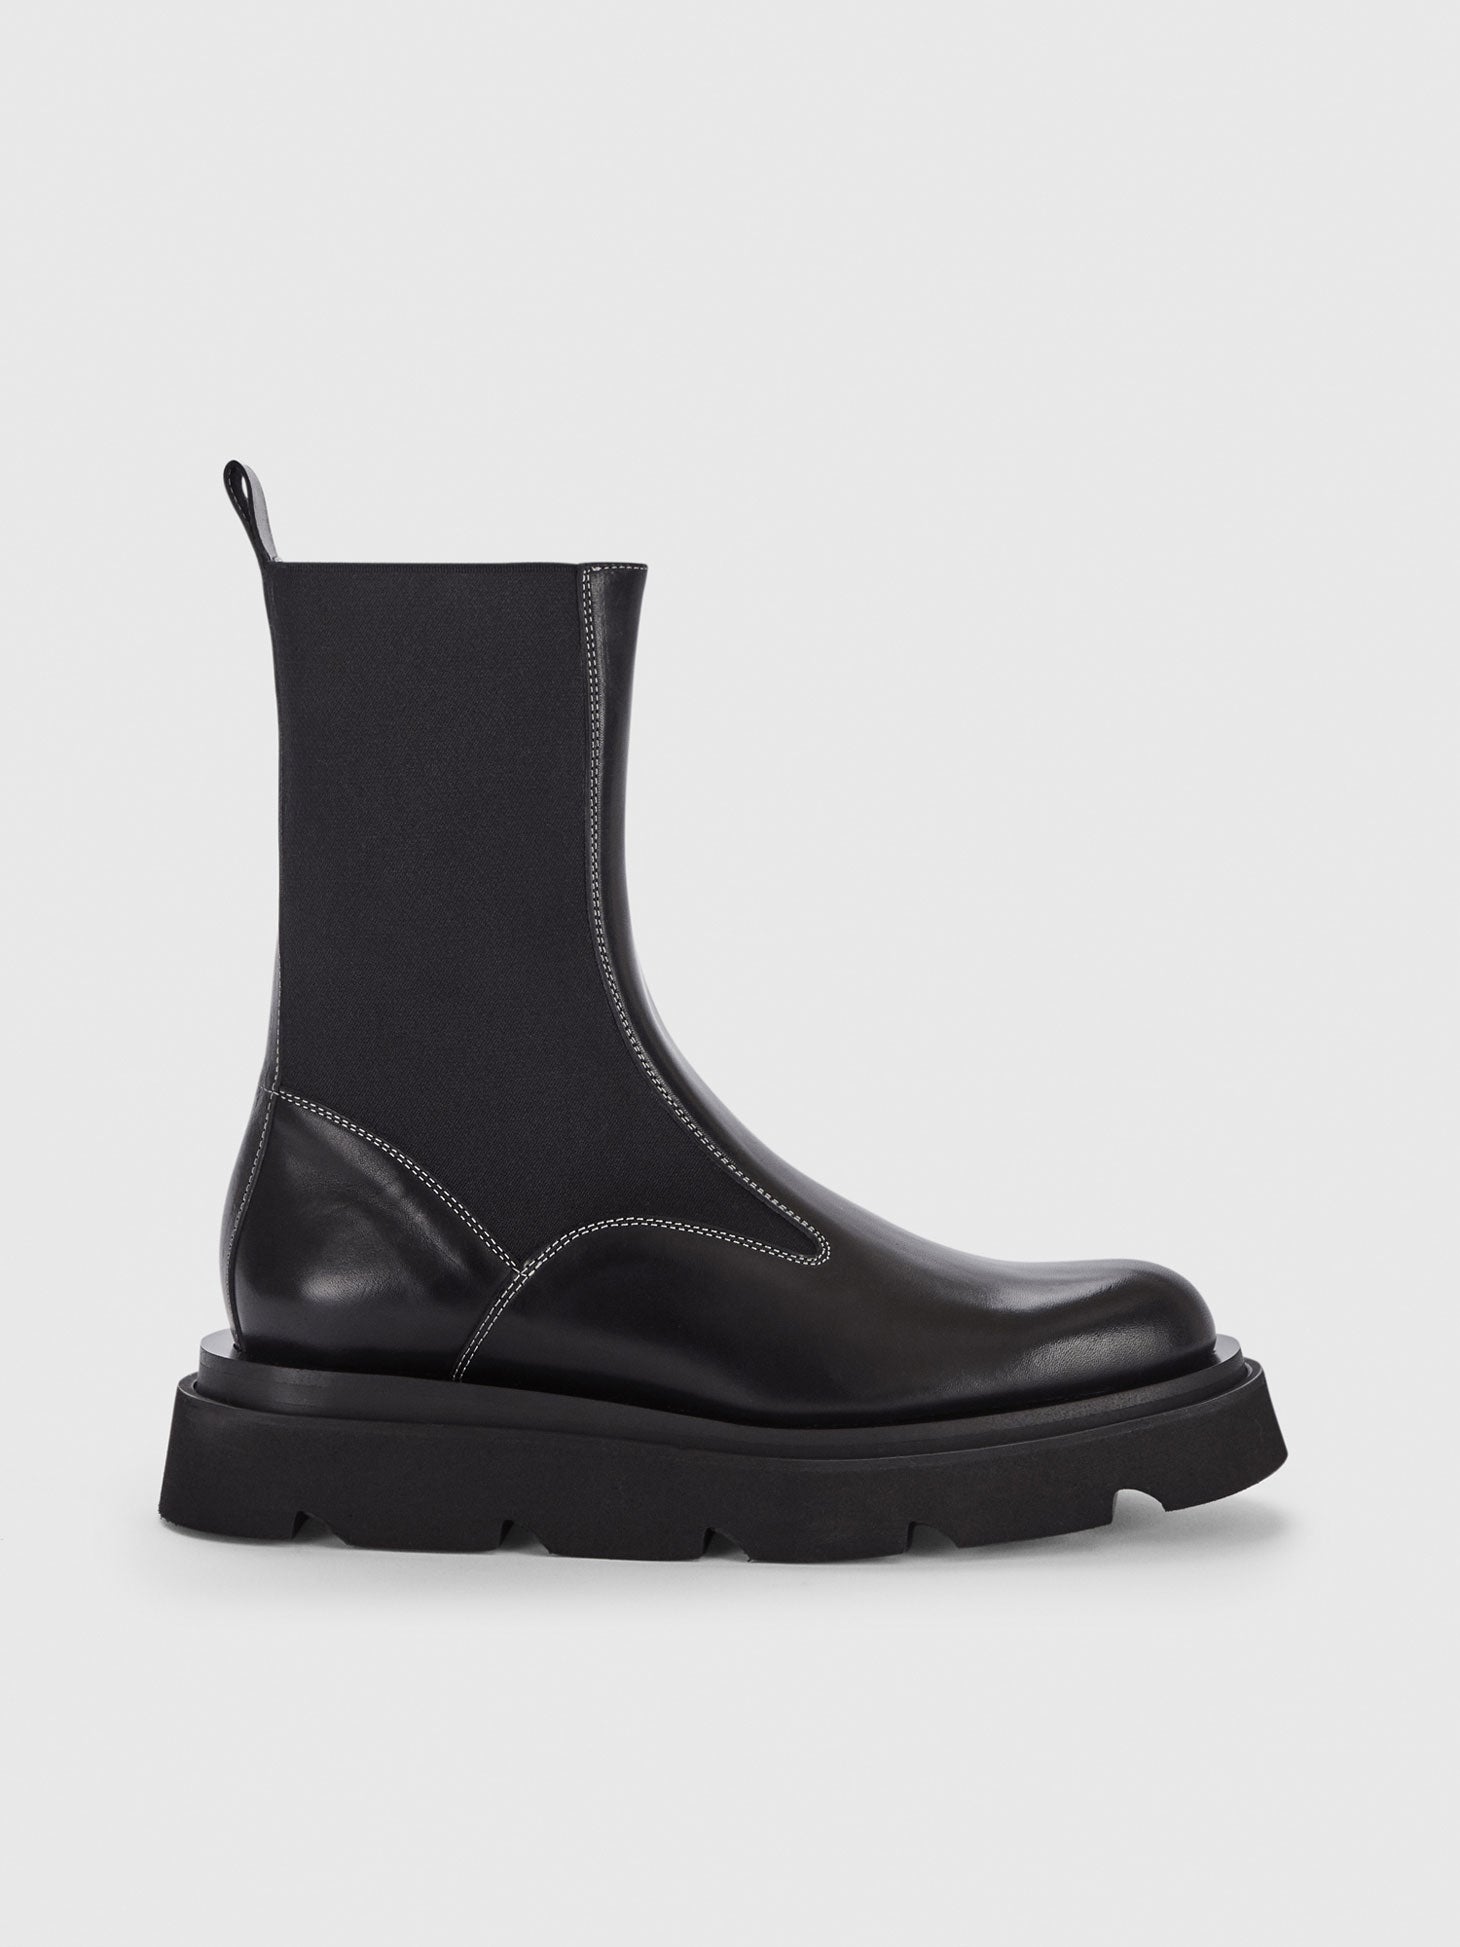 Moncalieri Black/Contrast Stitch Leather Chunky Boots